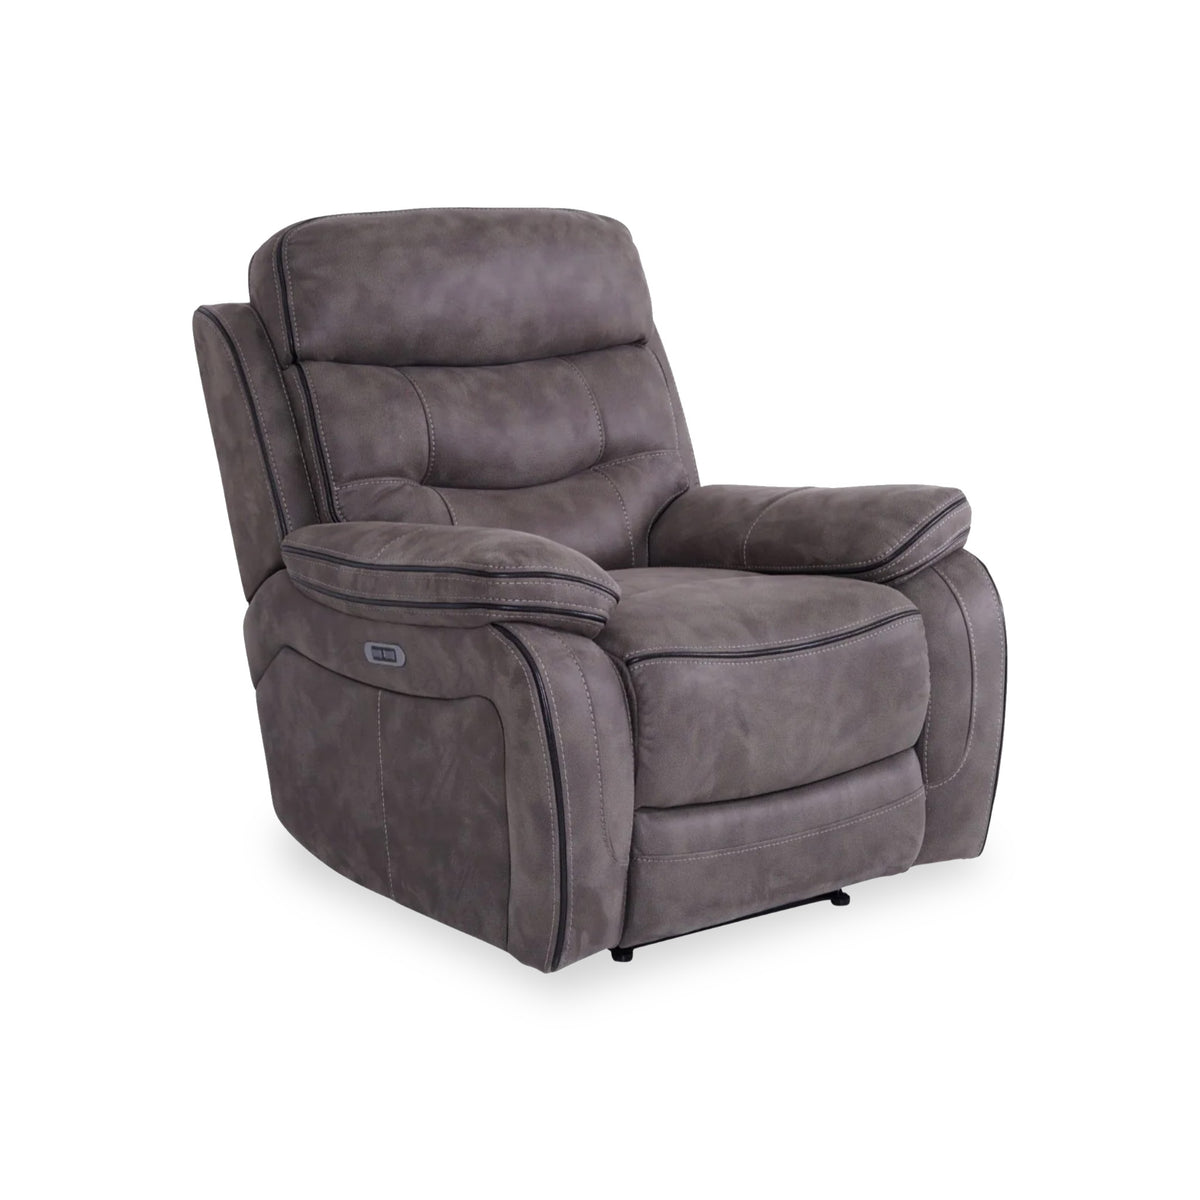 Stanford Charcoal Leather Electric Reclining Armchair from Roseland Furniture